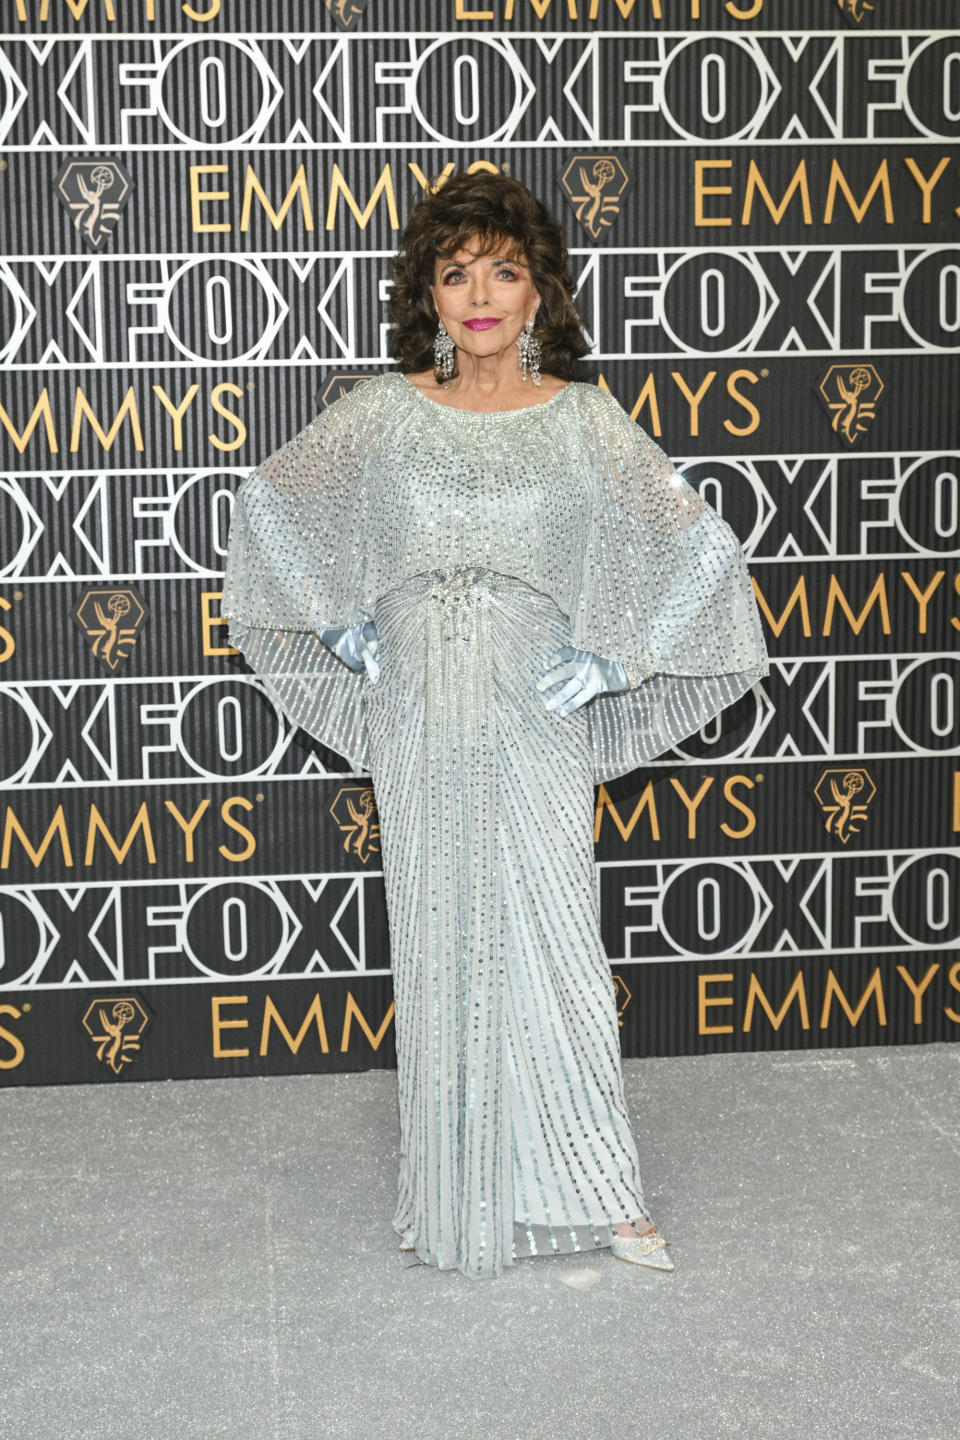 Joan Collins, sequin dress, red carpet, silver jewelry, Emmy Awards